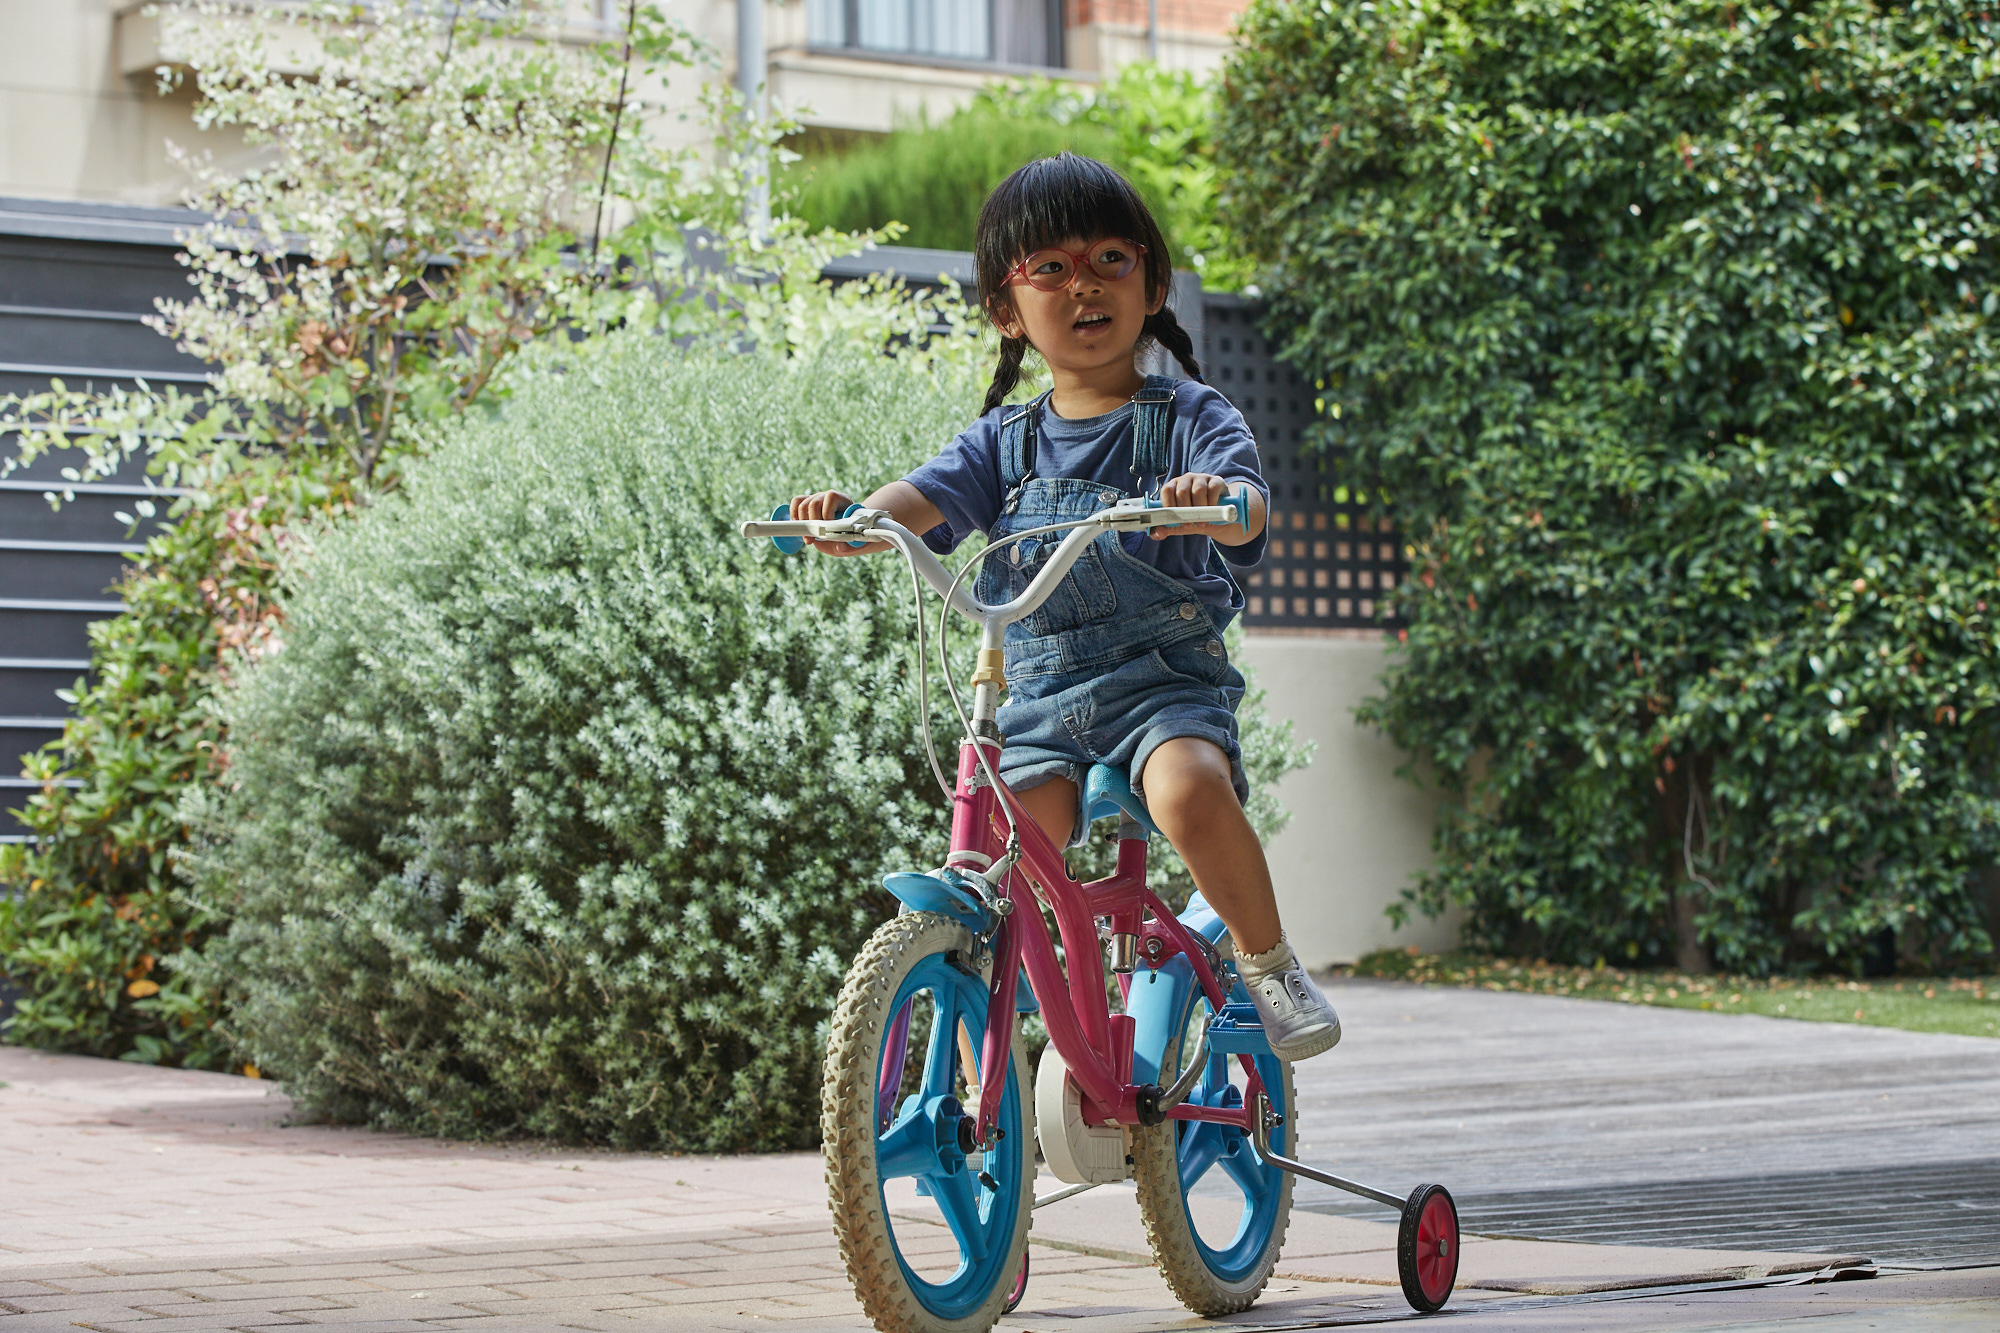 Child wearing glasses rides a bicycle